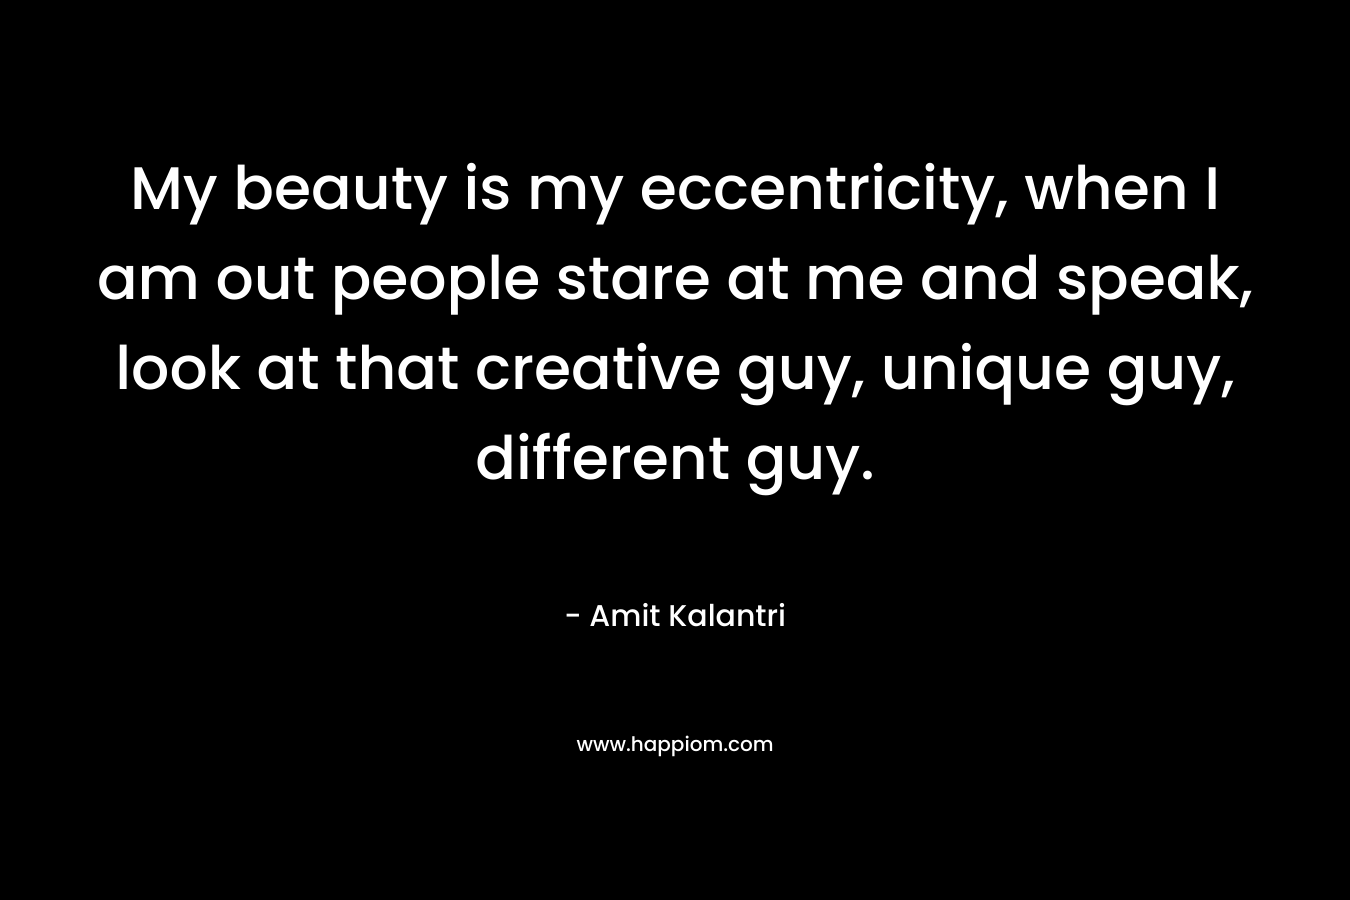 My beauty is my eccentricity, when I am out people stare at me and speak, look at that creative guy, unique guy, different guy.